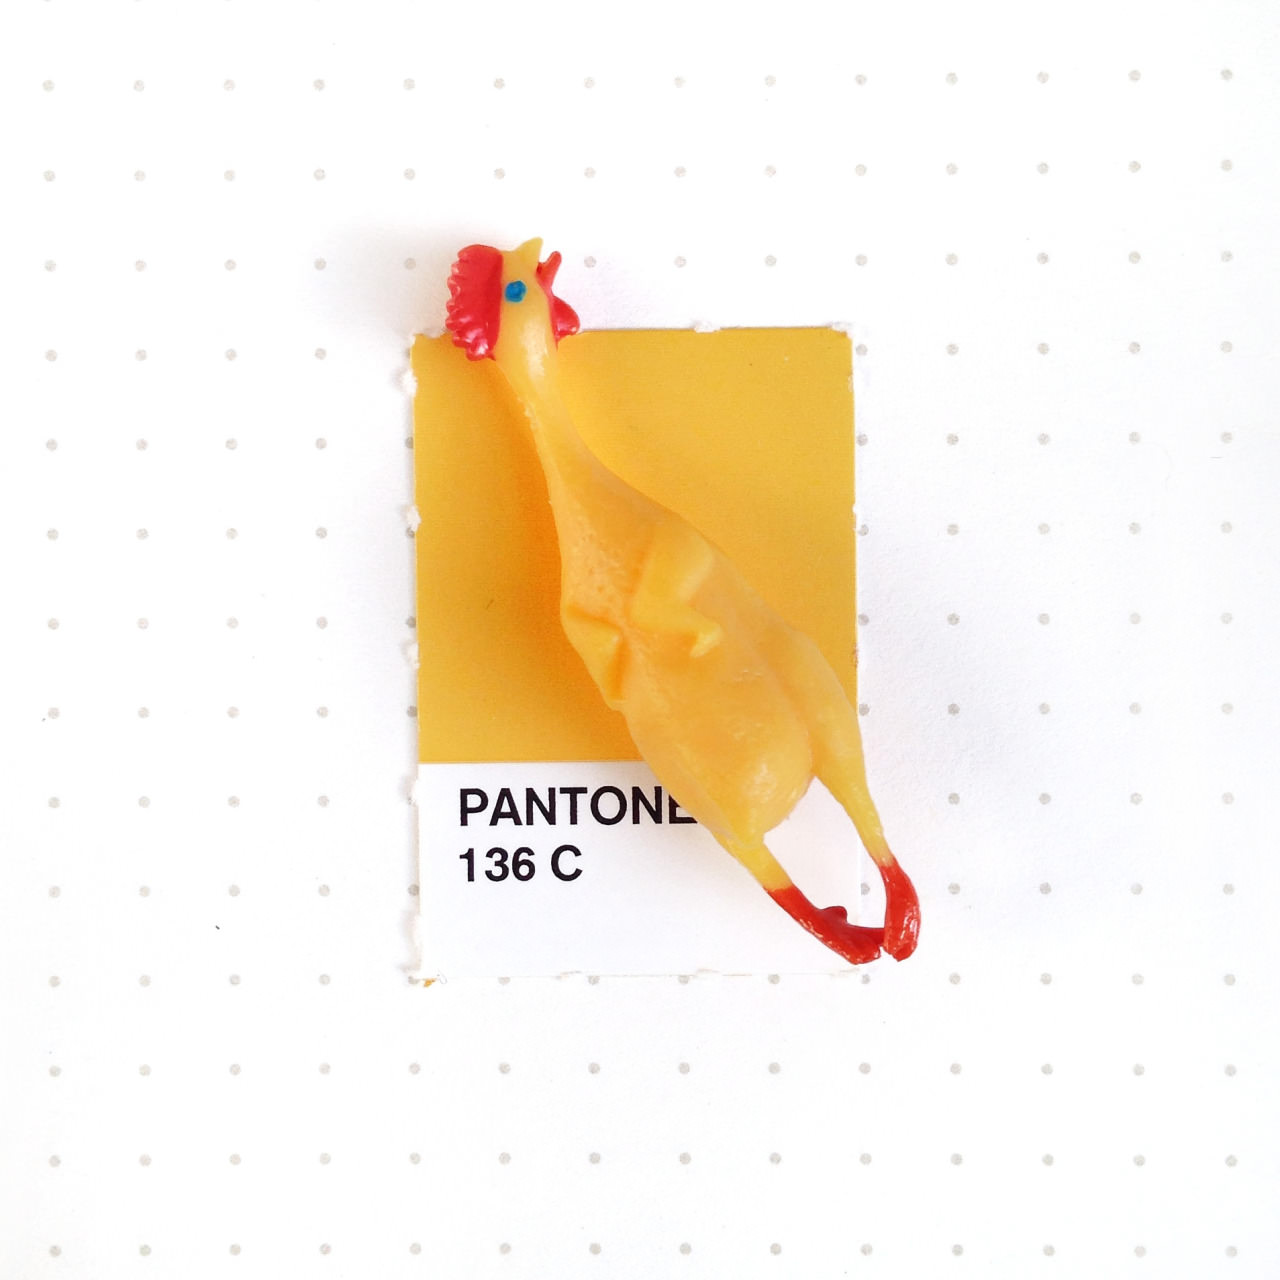 bridging-life-and-design-in-15-pantone-color-matches-14